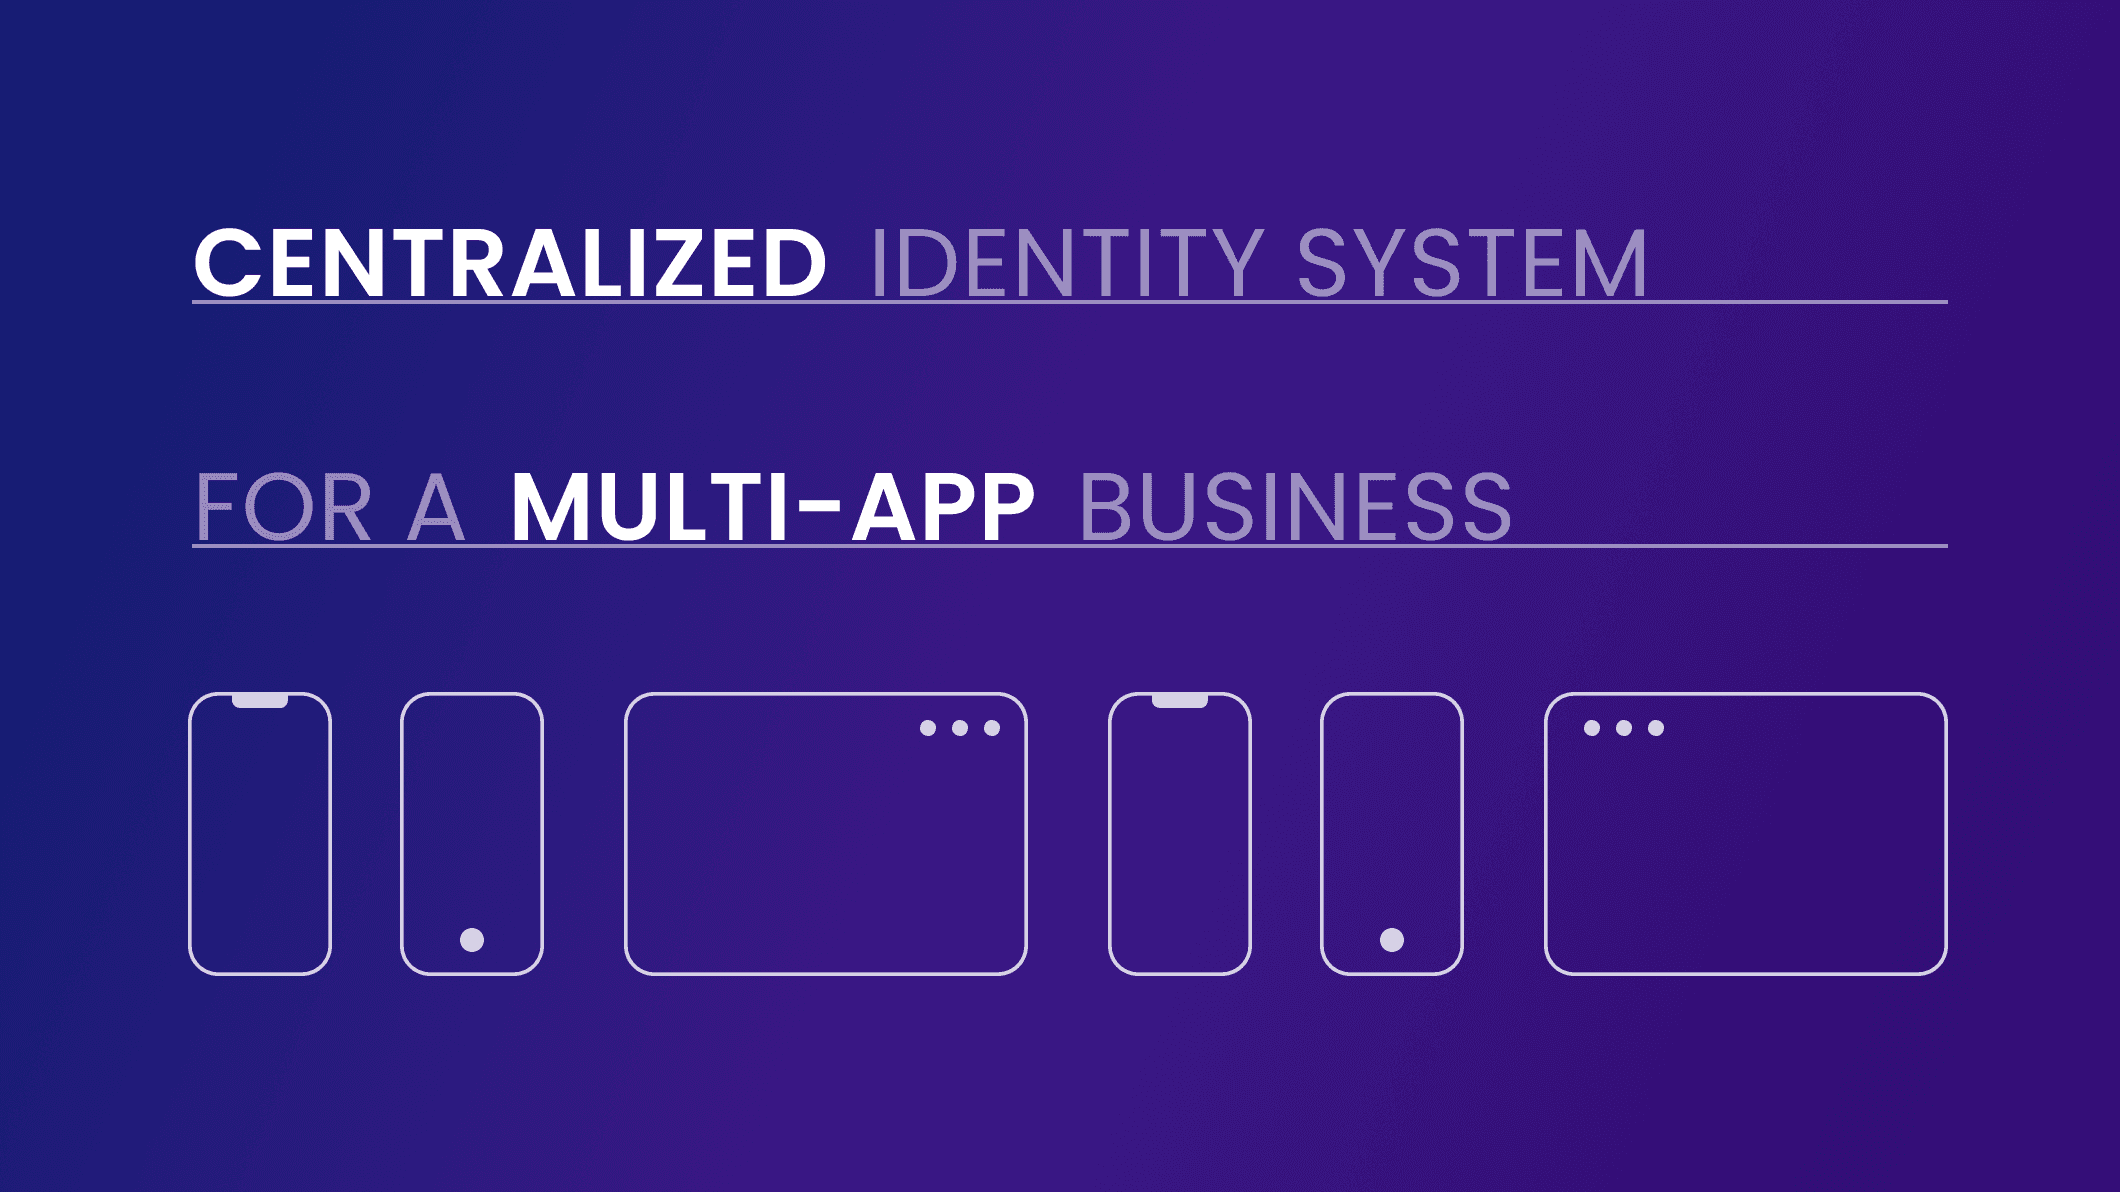 Why you need a centralized identity system for a multi-app business